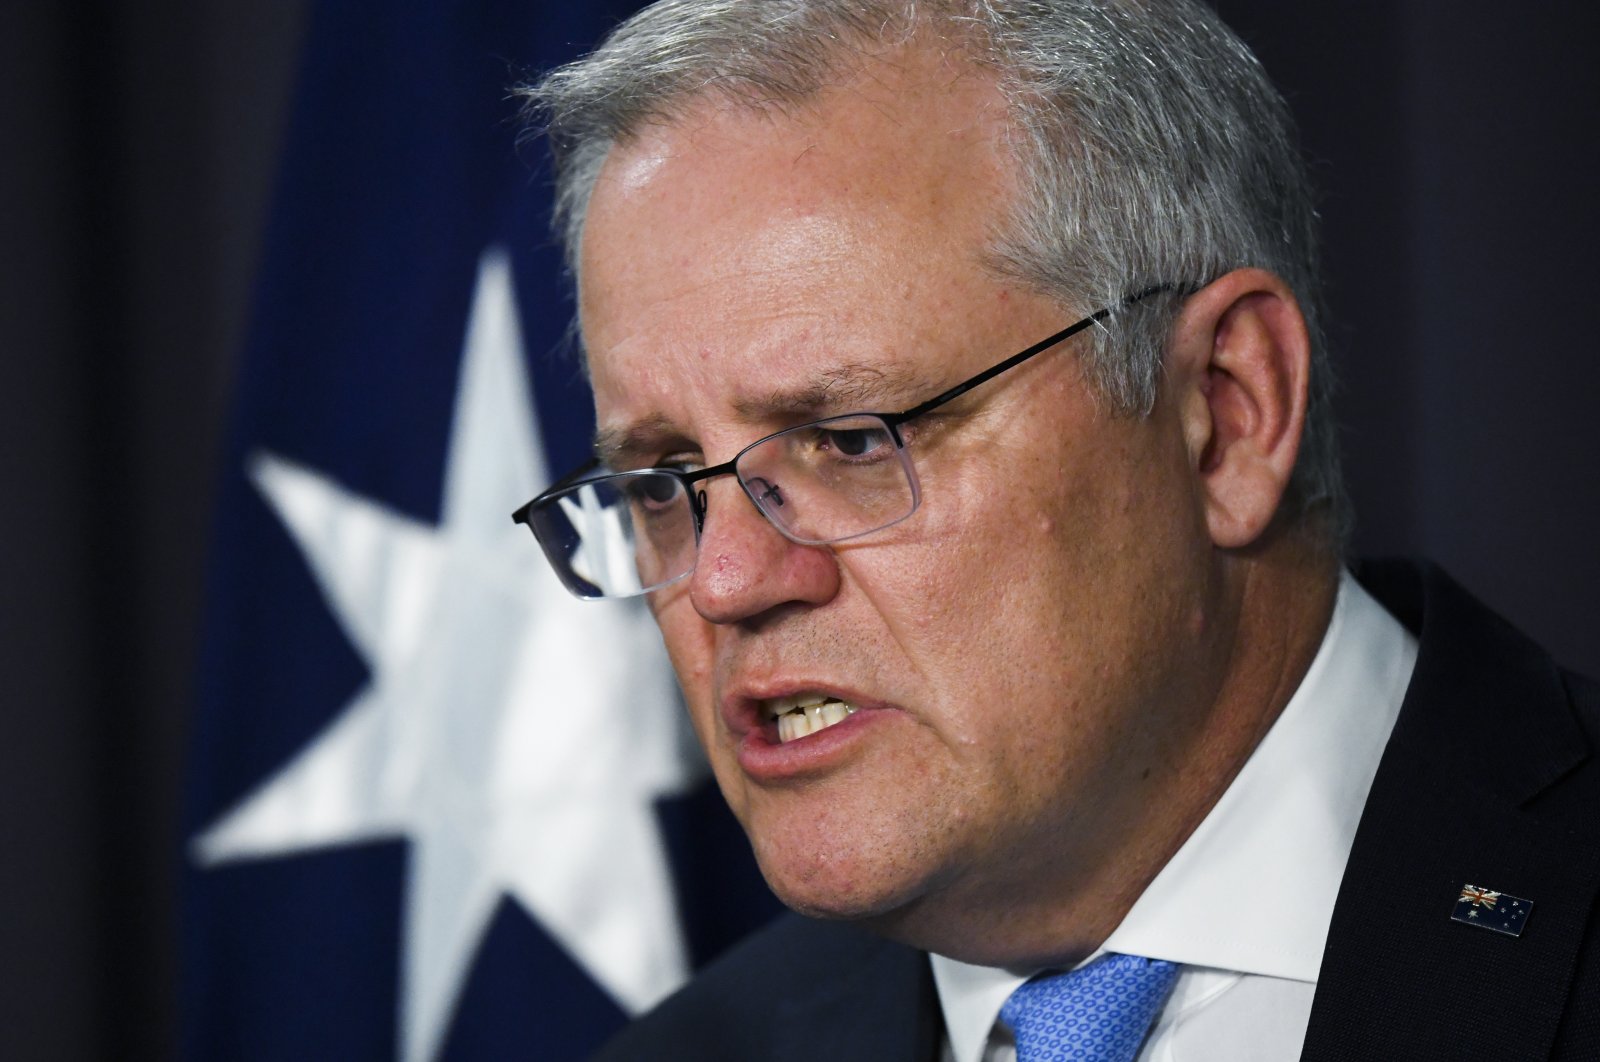 Australian Prime Minister Scott Morrison speaks to the media during a press conference at Parliament House in Canberra, Nov. 12, 2020. (AP Photo)